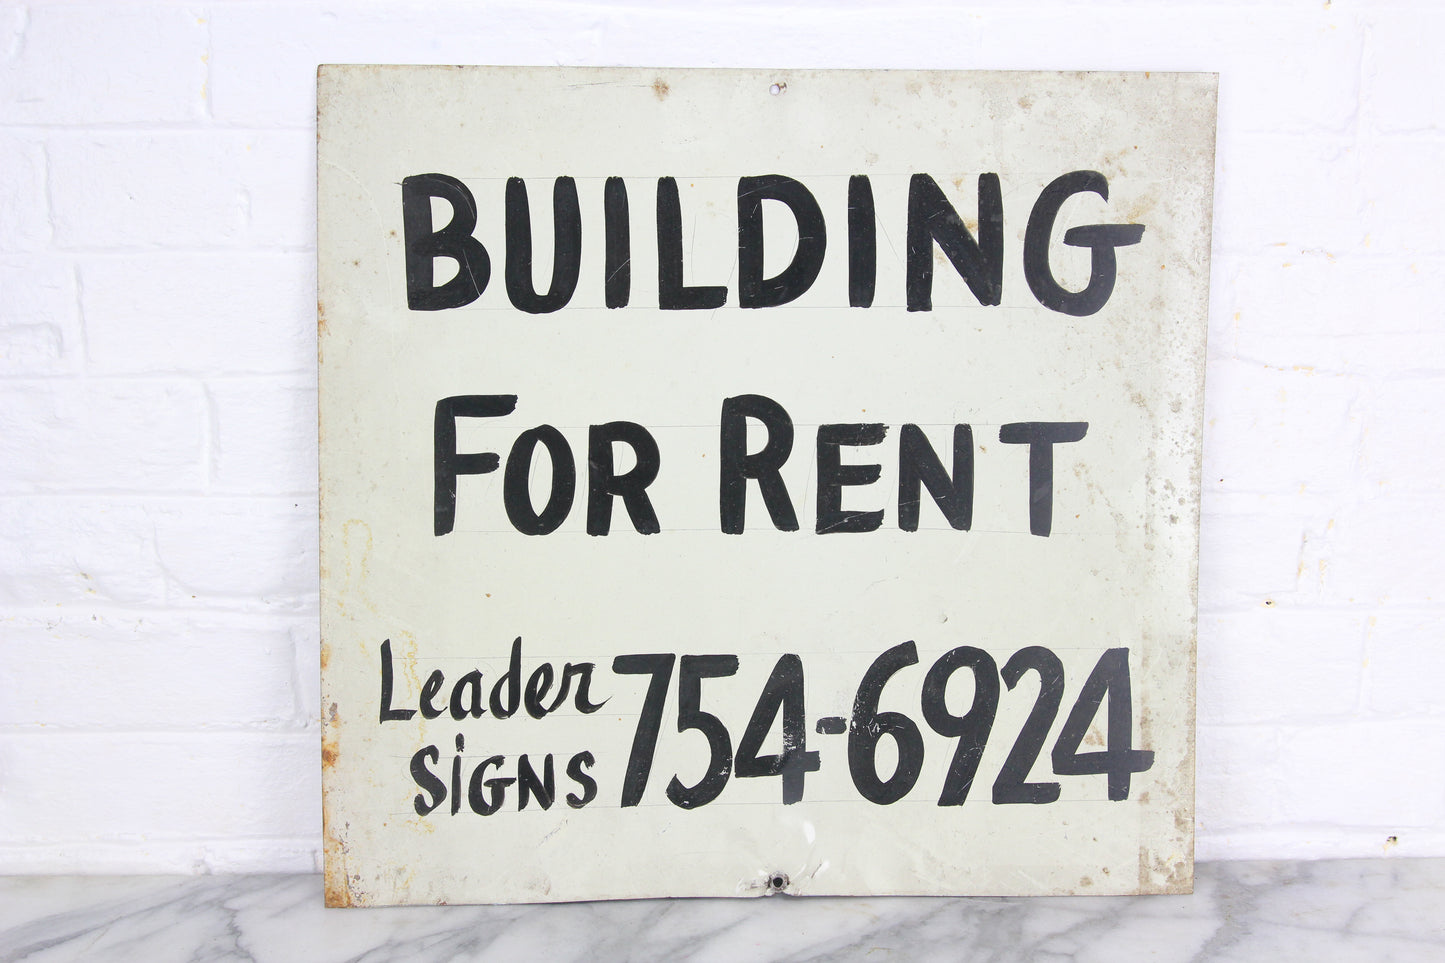 Building for Rent, Handpainted Metal Sign by Leader Signs, Worcester, MA - 18x17"